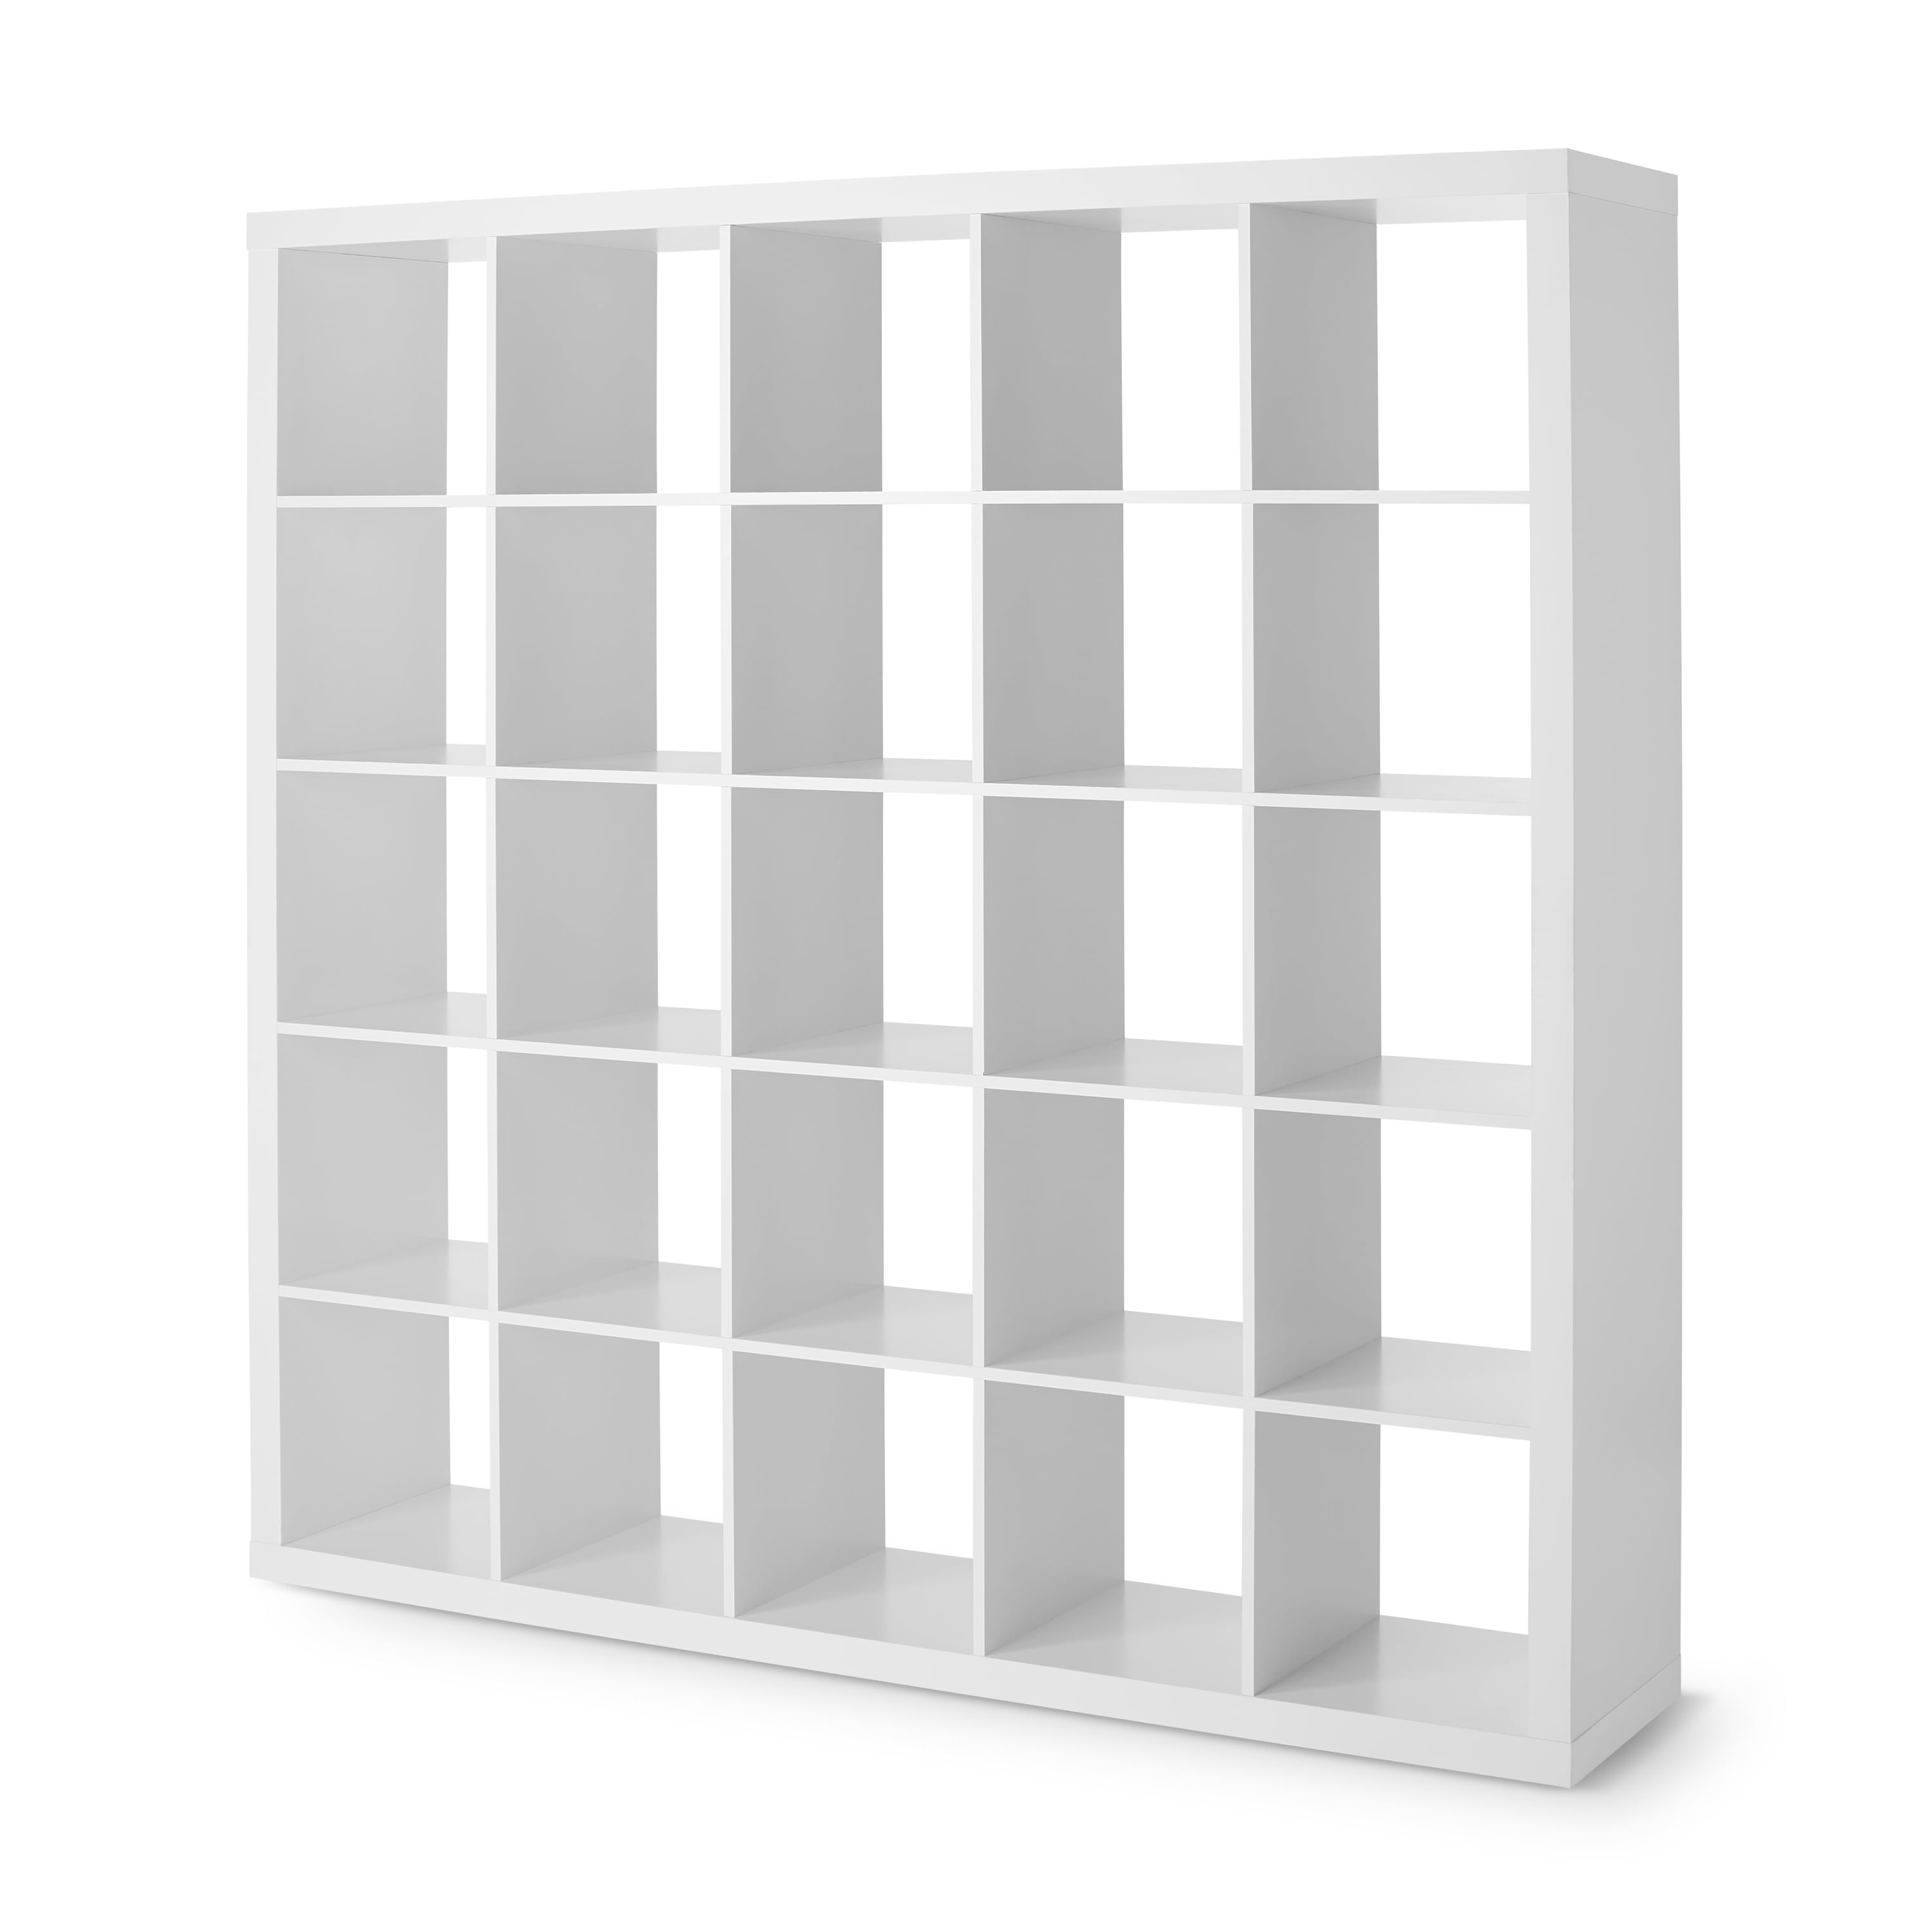 Gardens 25 Cube Organizer Room Divider, White Cube Bookcase With Doors